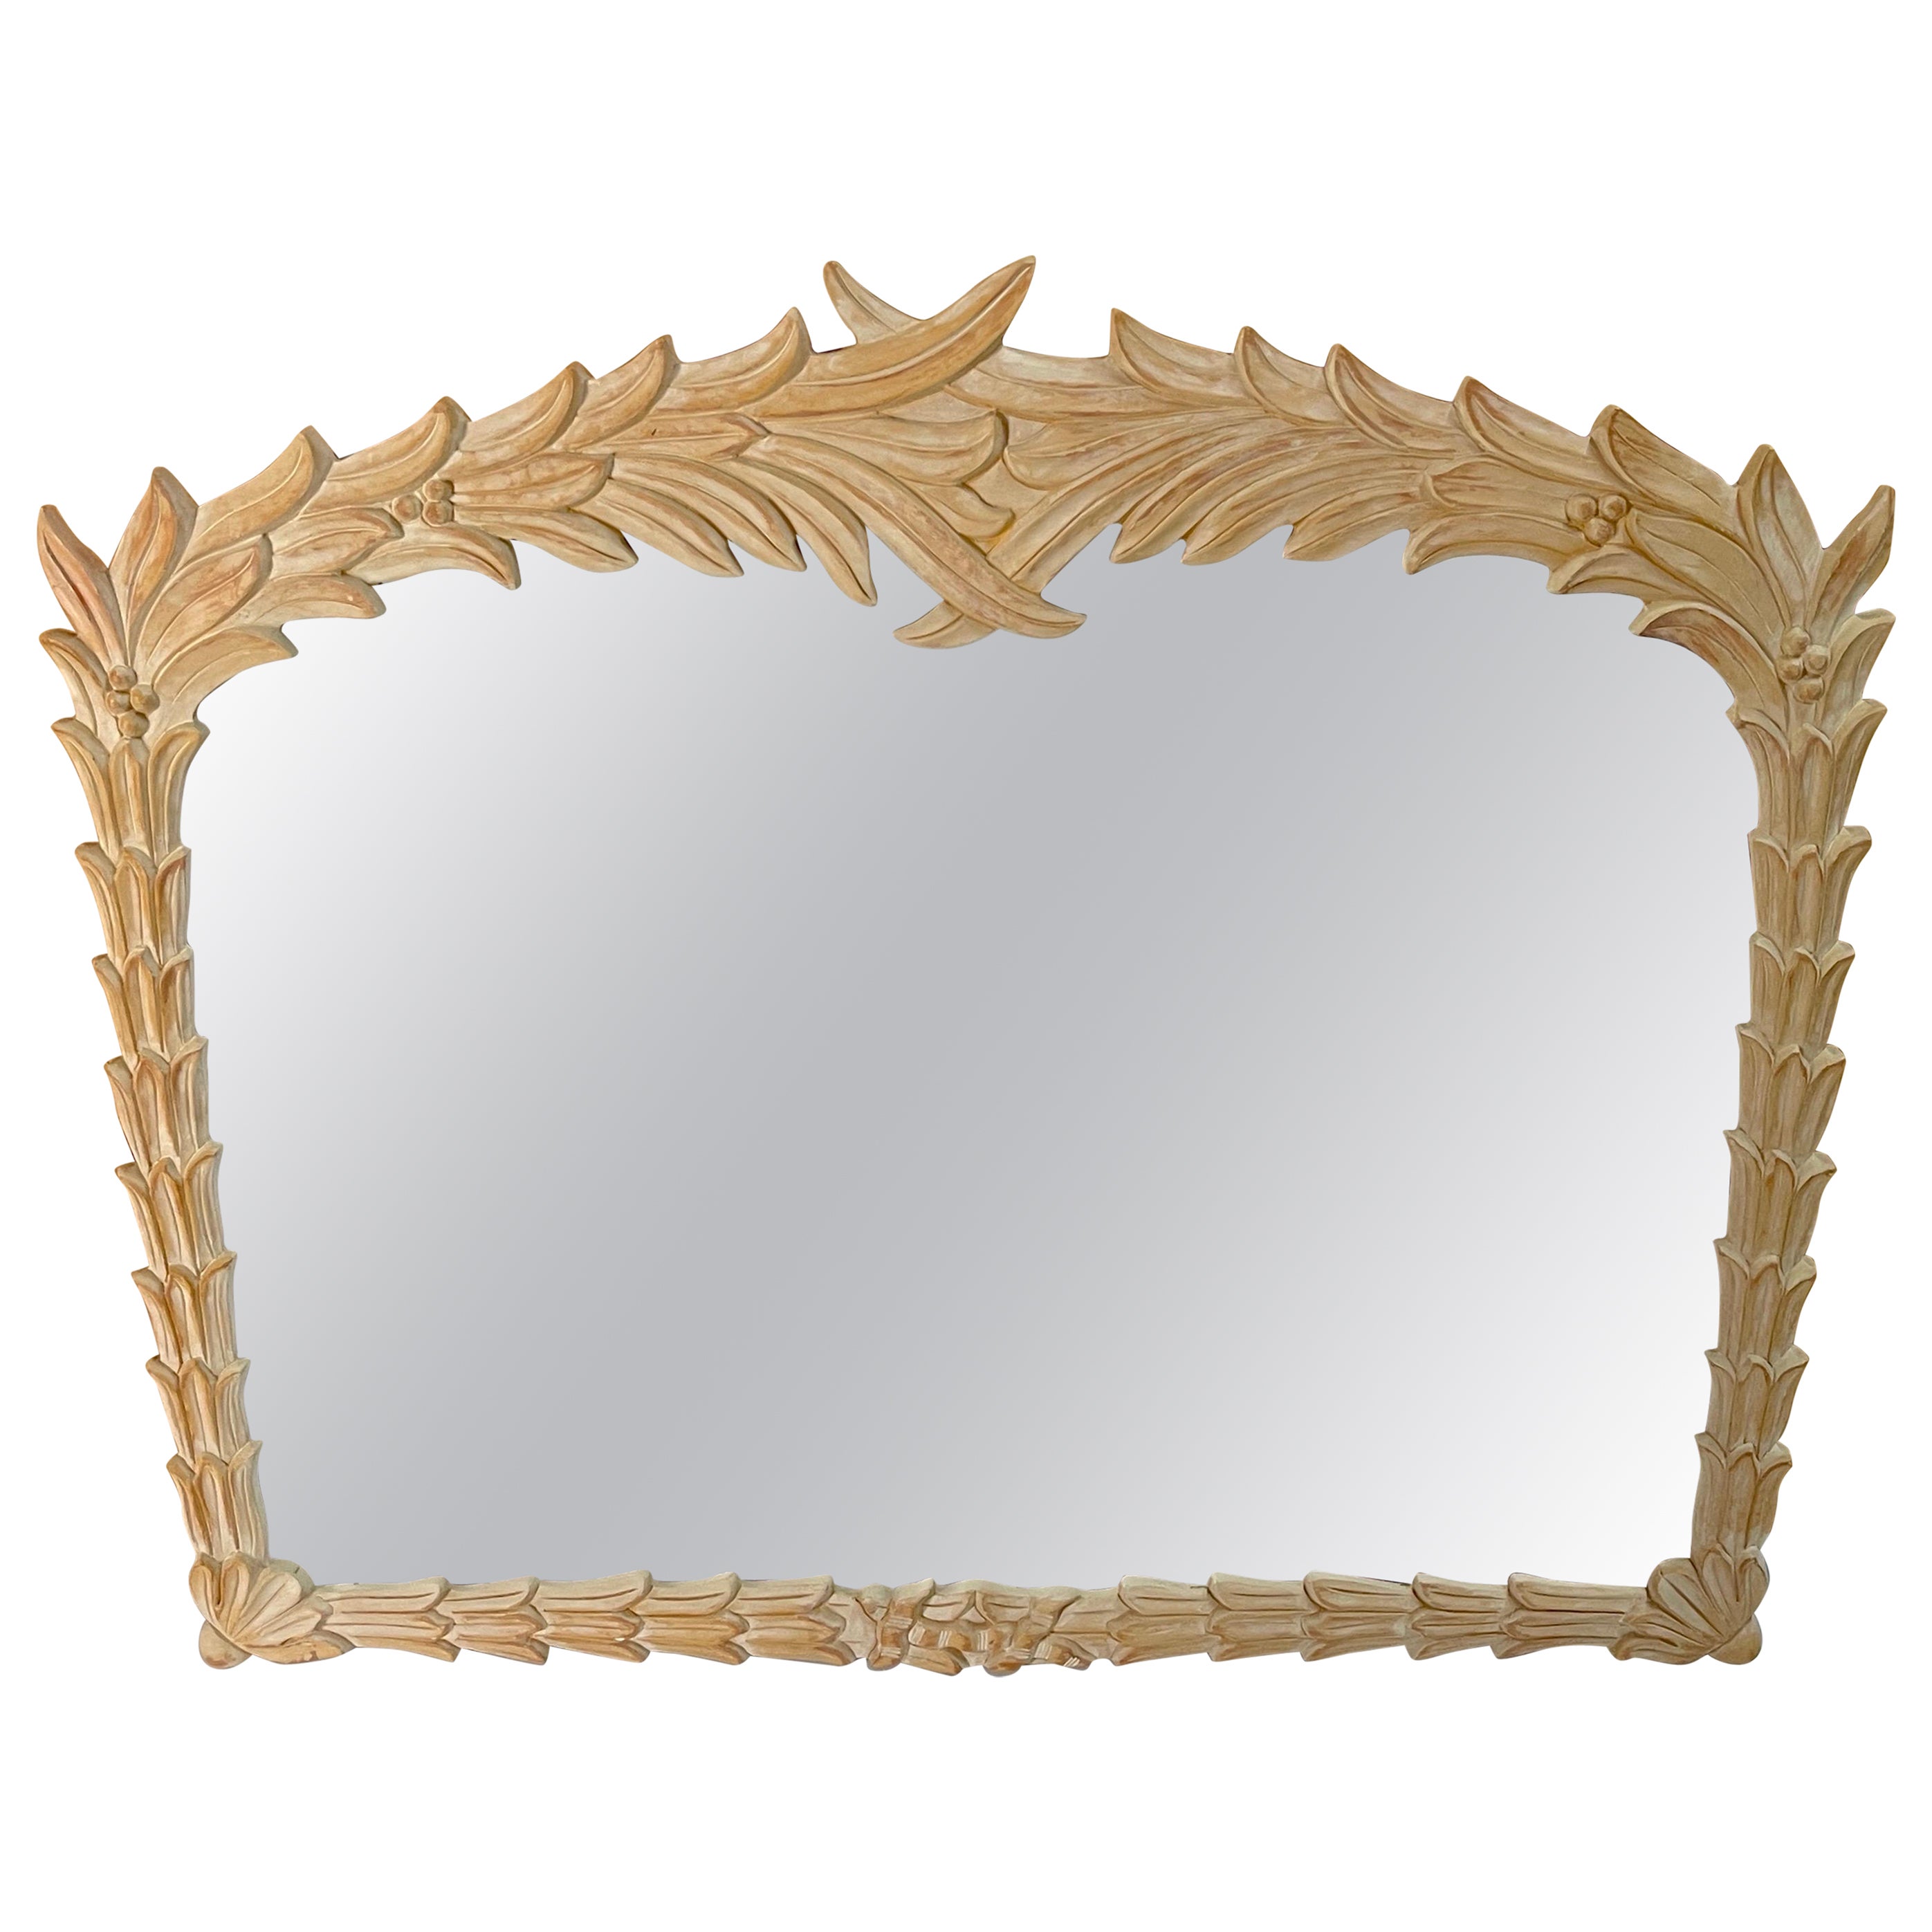 Bleached Palmette Rectangular Mirror, in the Style of Serge Roche 